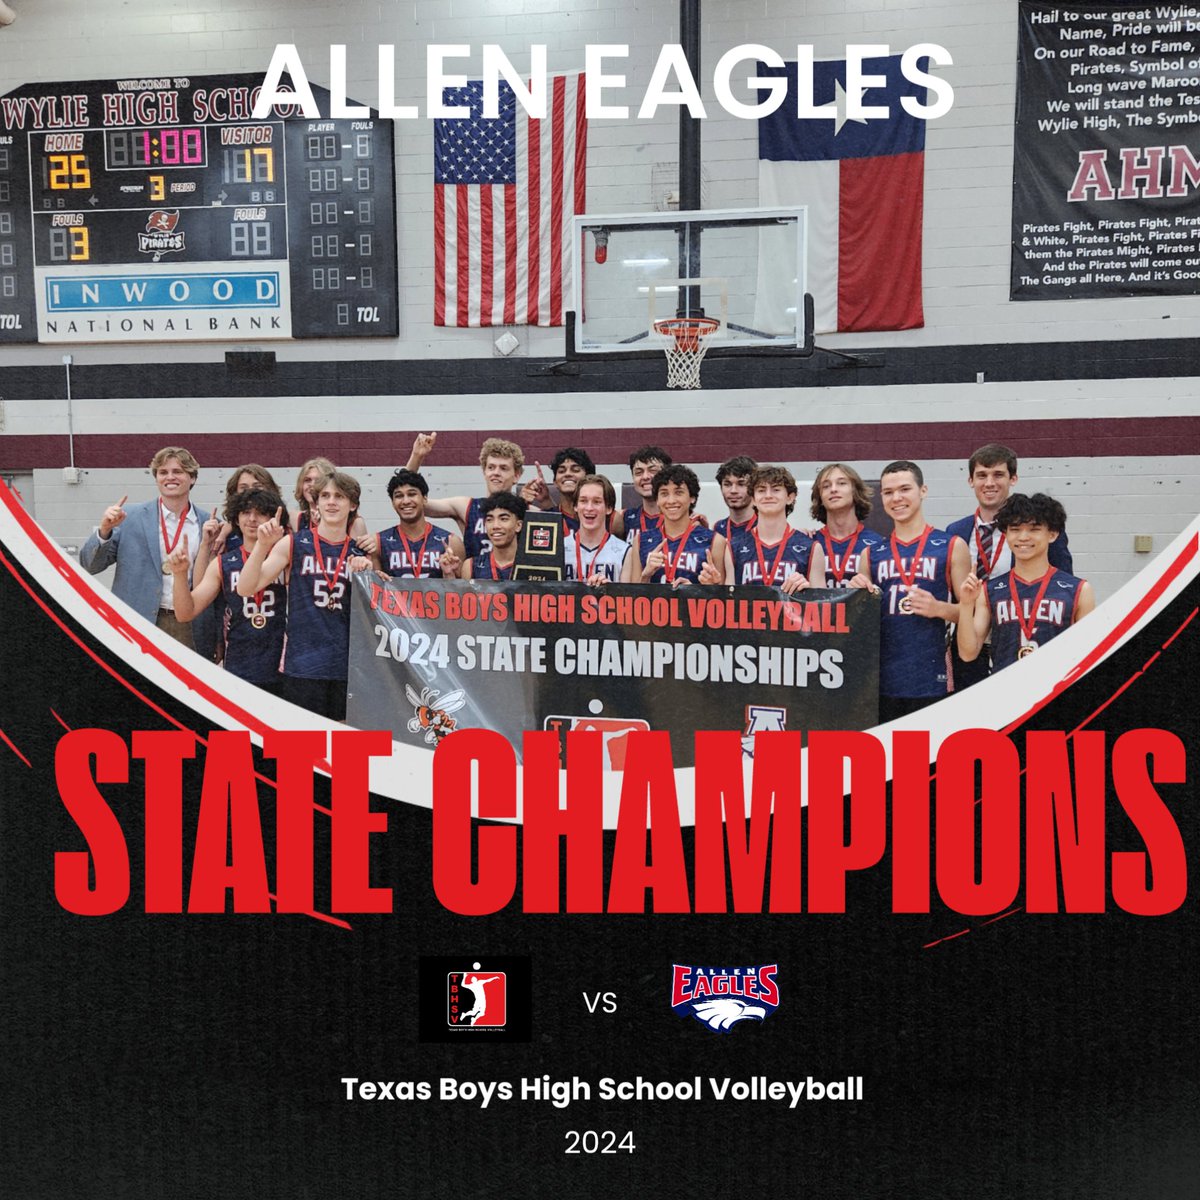 TBHSV 2024 State Champions are The Allen Eagles! Congrats to Allen HS and all their players! And a giant thank you to all our players, coaches, and parents who make this happen! tbhsv.com for info on how to play for your school next season! #boysvolleyball